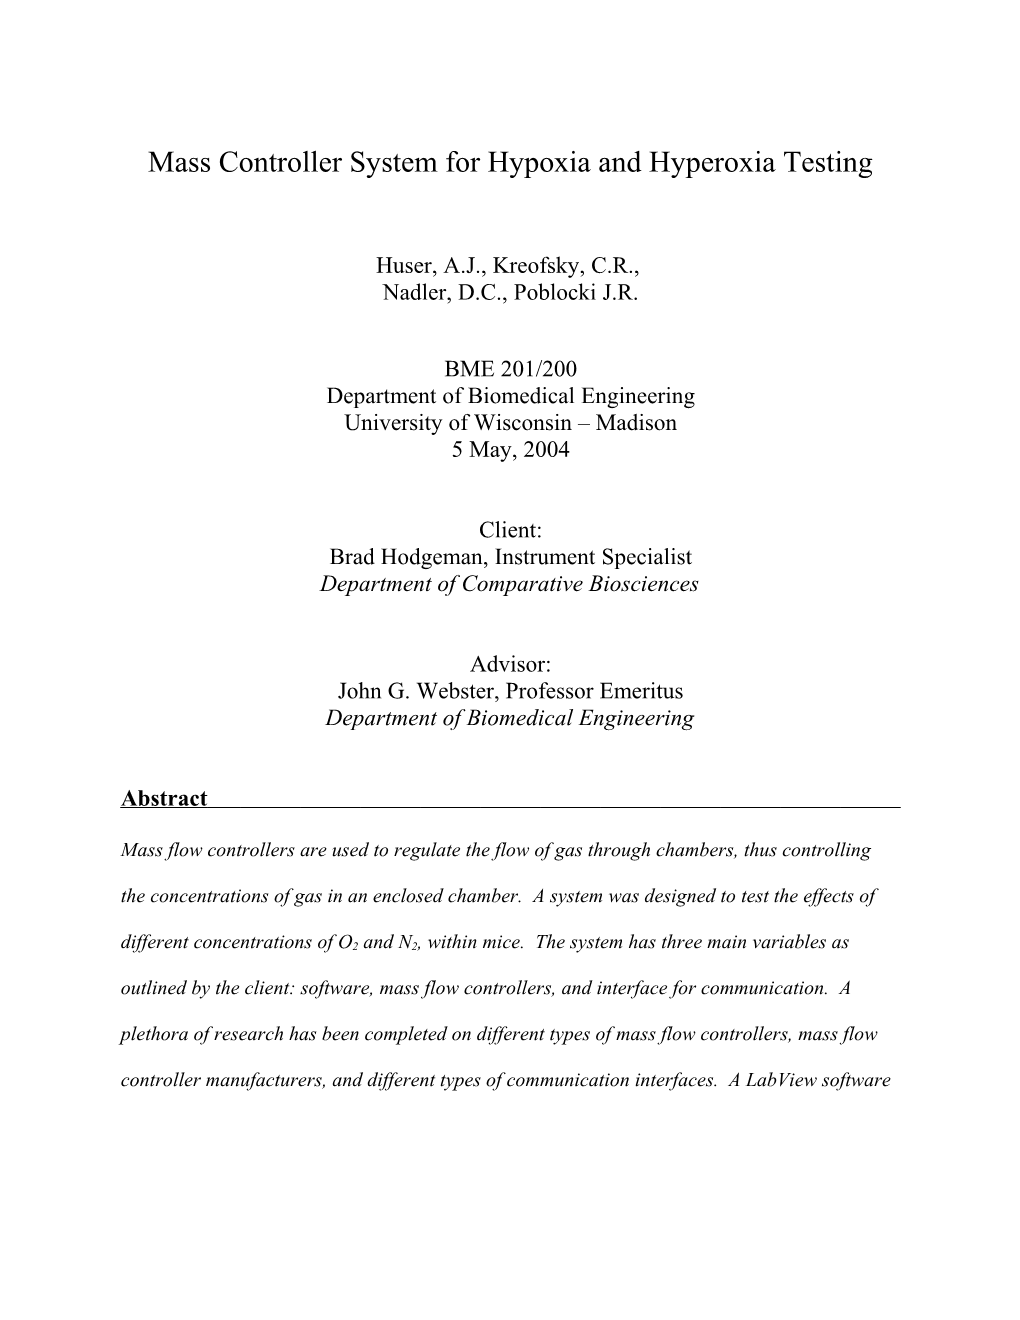 Mass Controller System for Hypoxia and Hyperoxia Testing